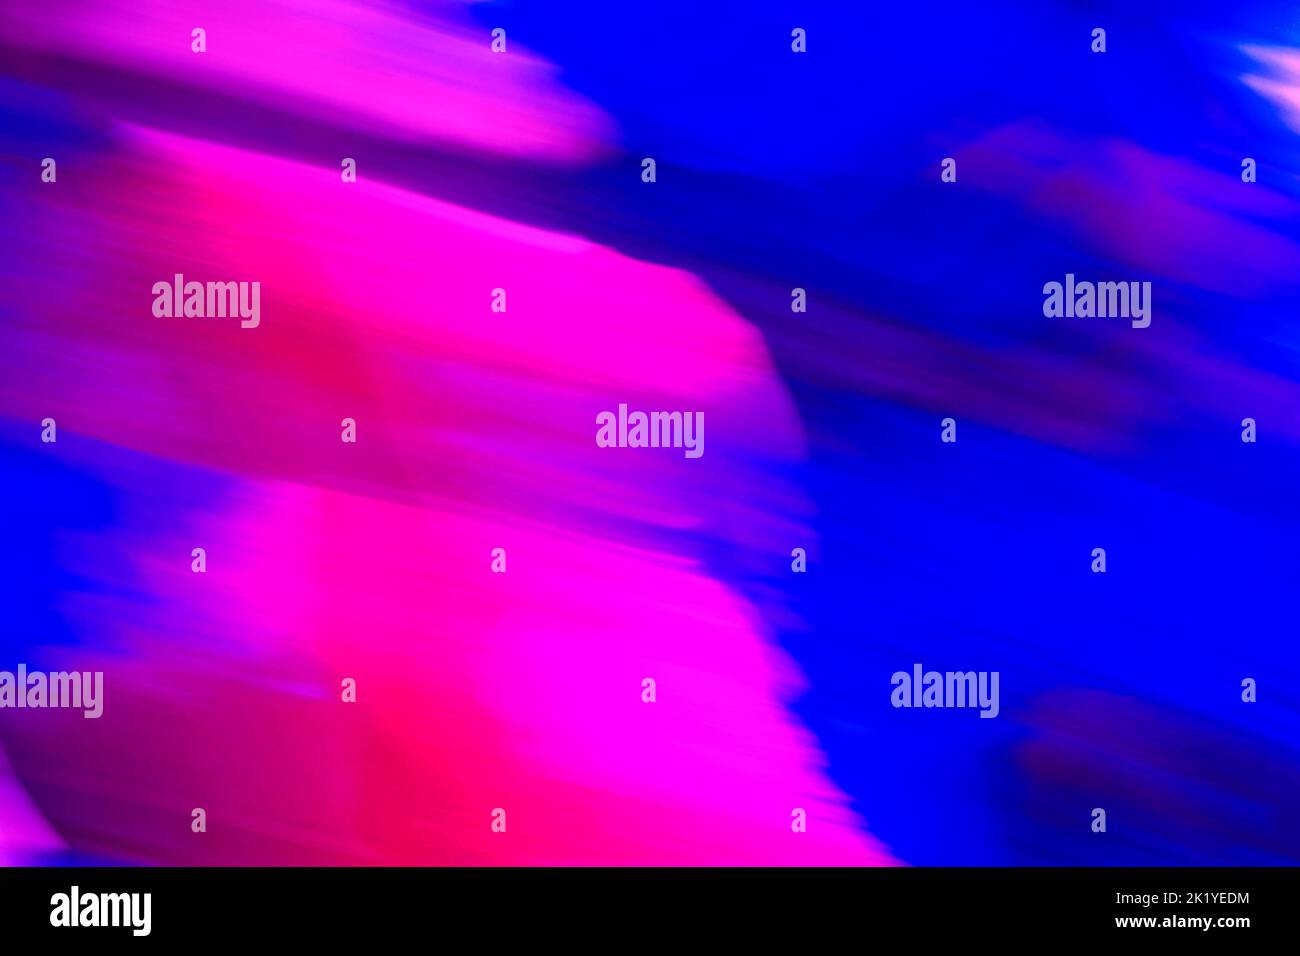 Abstract colorful background. Bright neon with pink stain. Pink  blue creative wallpaper. Stock Photo